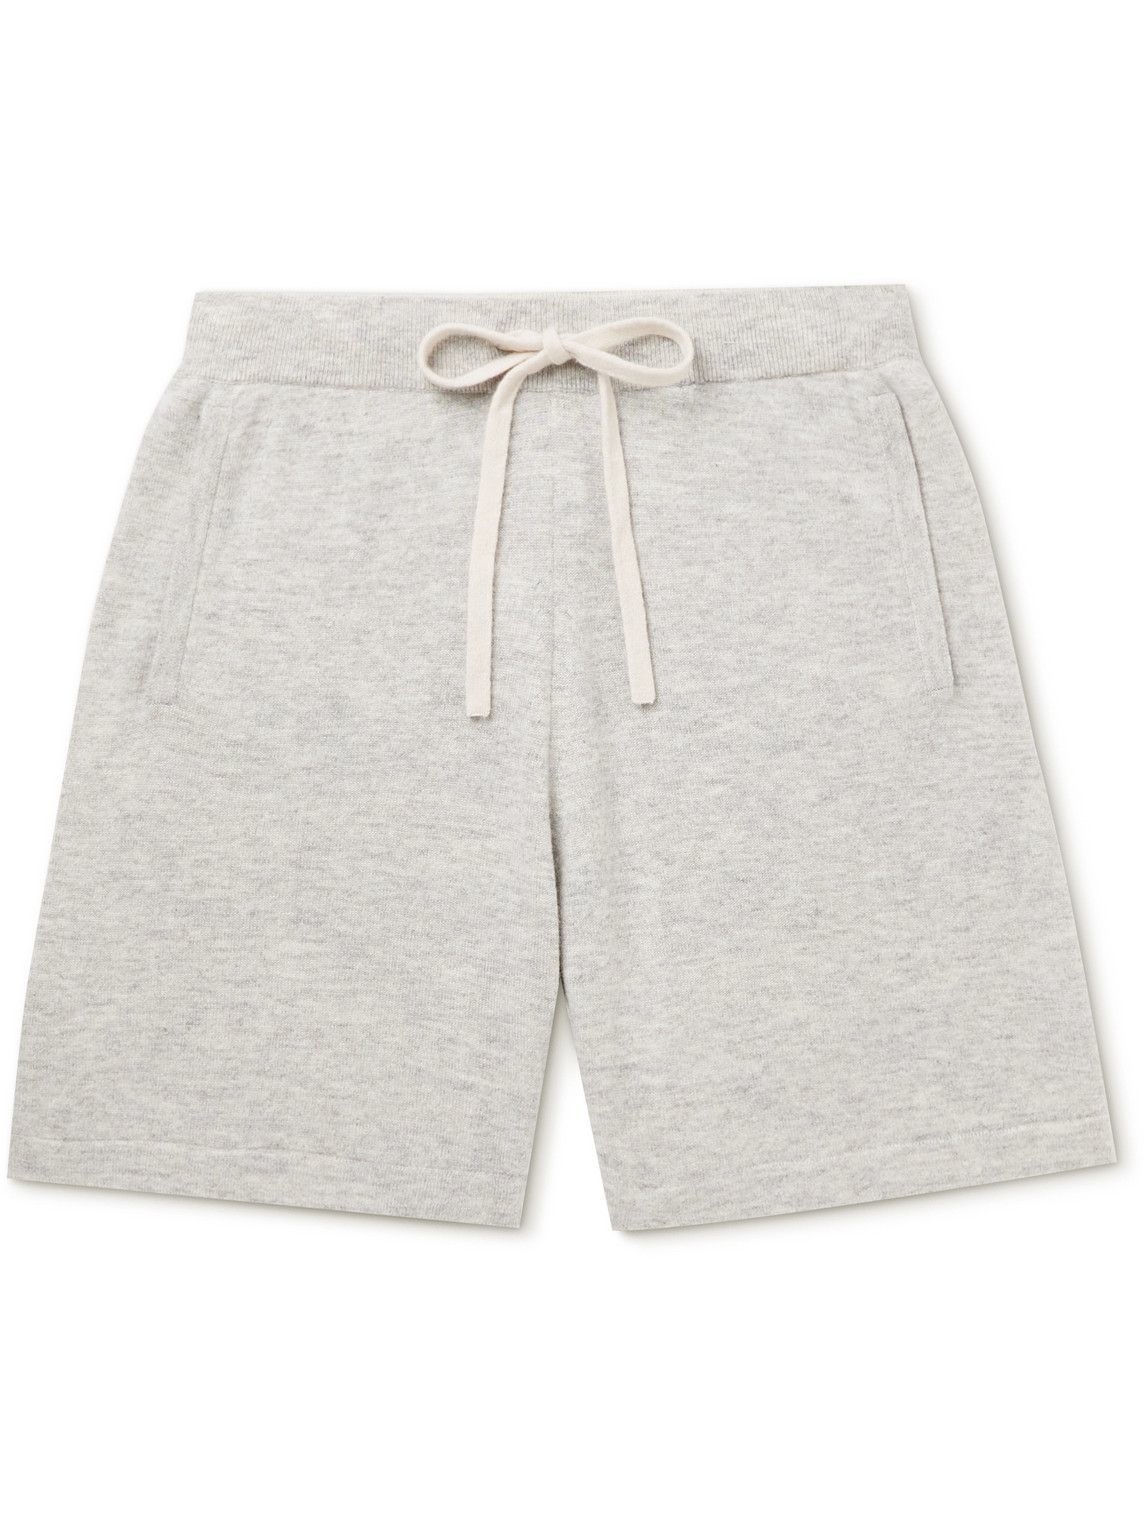 Photo: Allude - Straight-Leg Virgin Wool and Cashmere-Blend Shorts - Gray